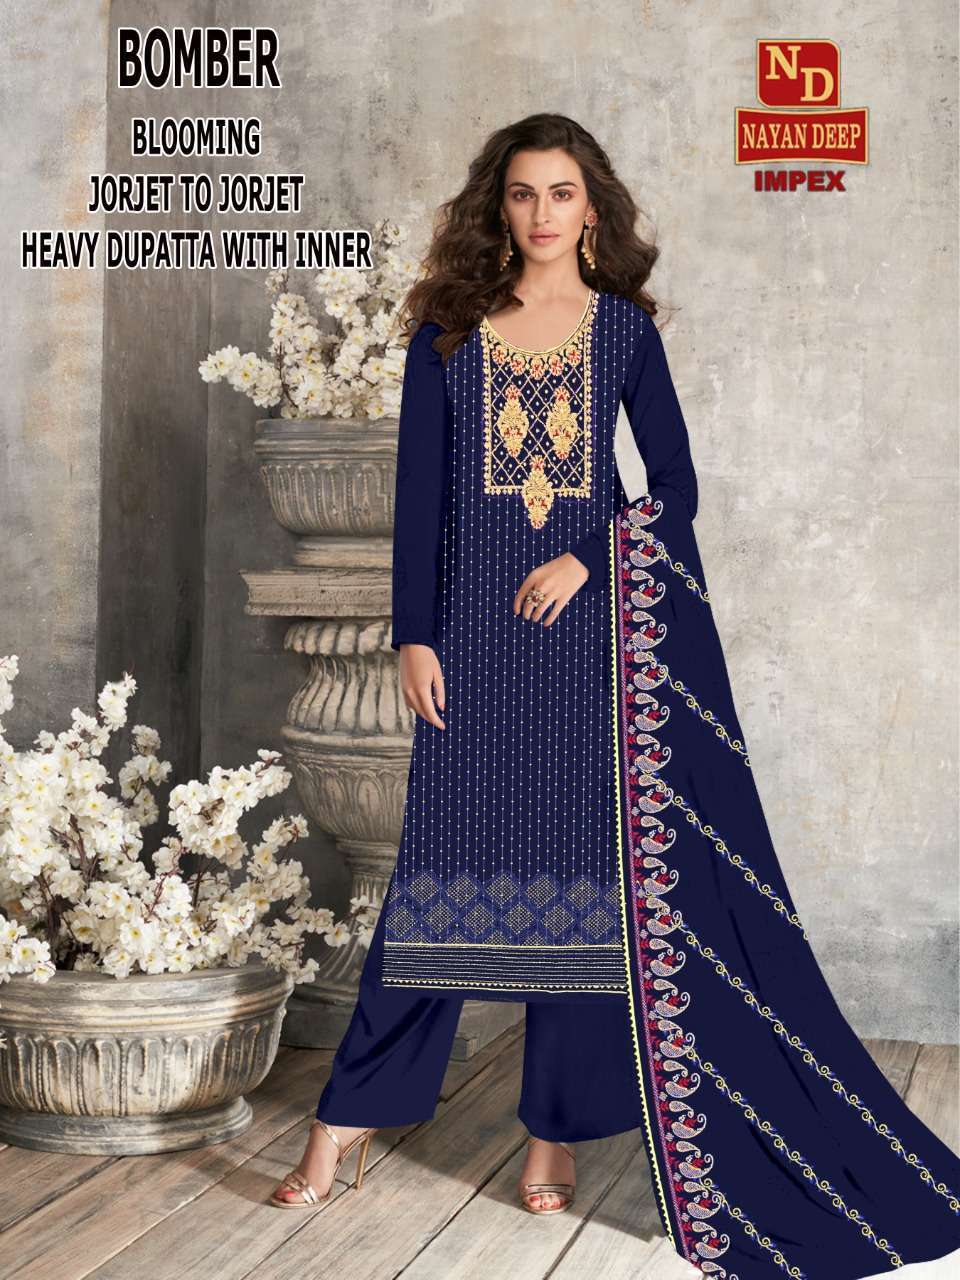 nayandeep impex bomber heavy work georgette non catalog ladies suits